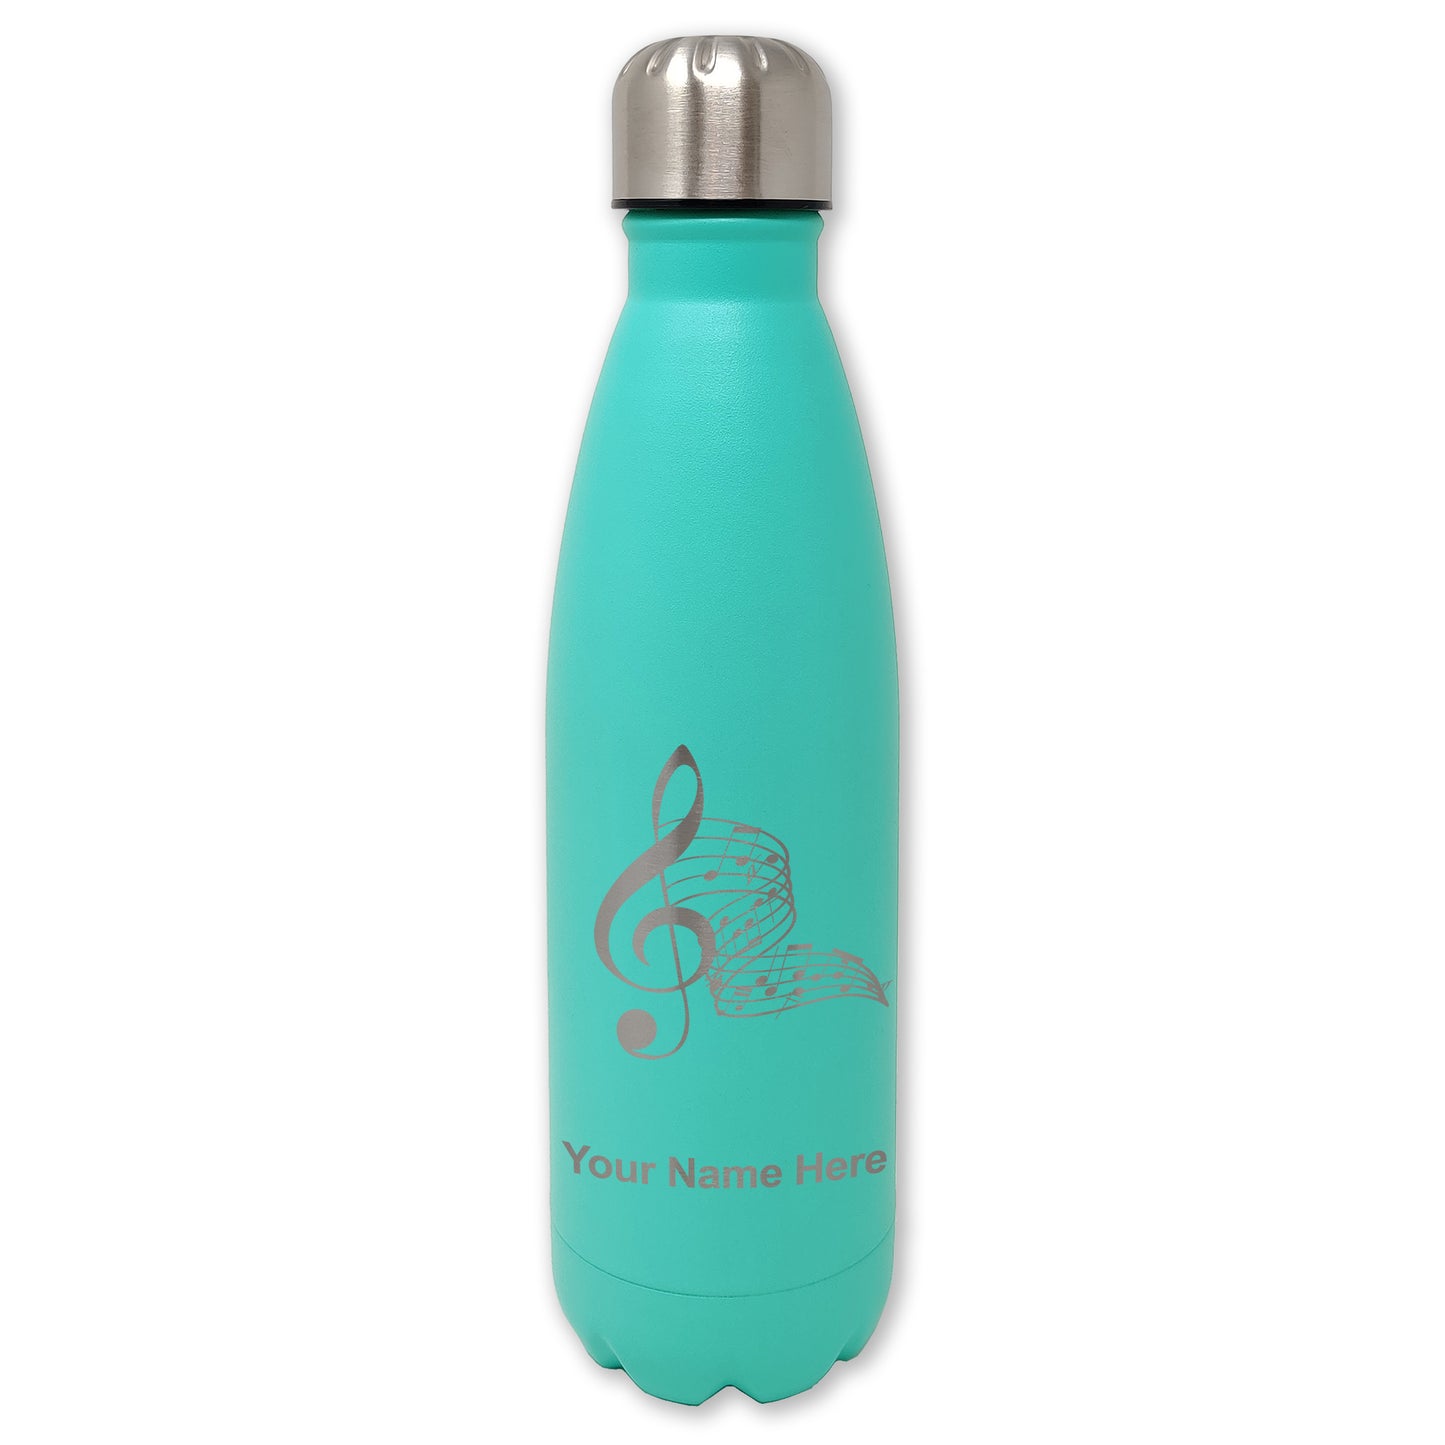 LaserGram Double Wall Water Bottle, Musical Notes, Personalized Engraving Included